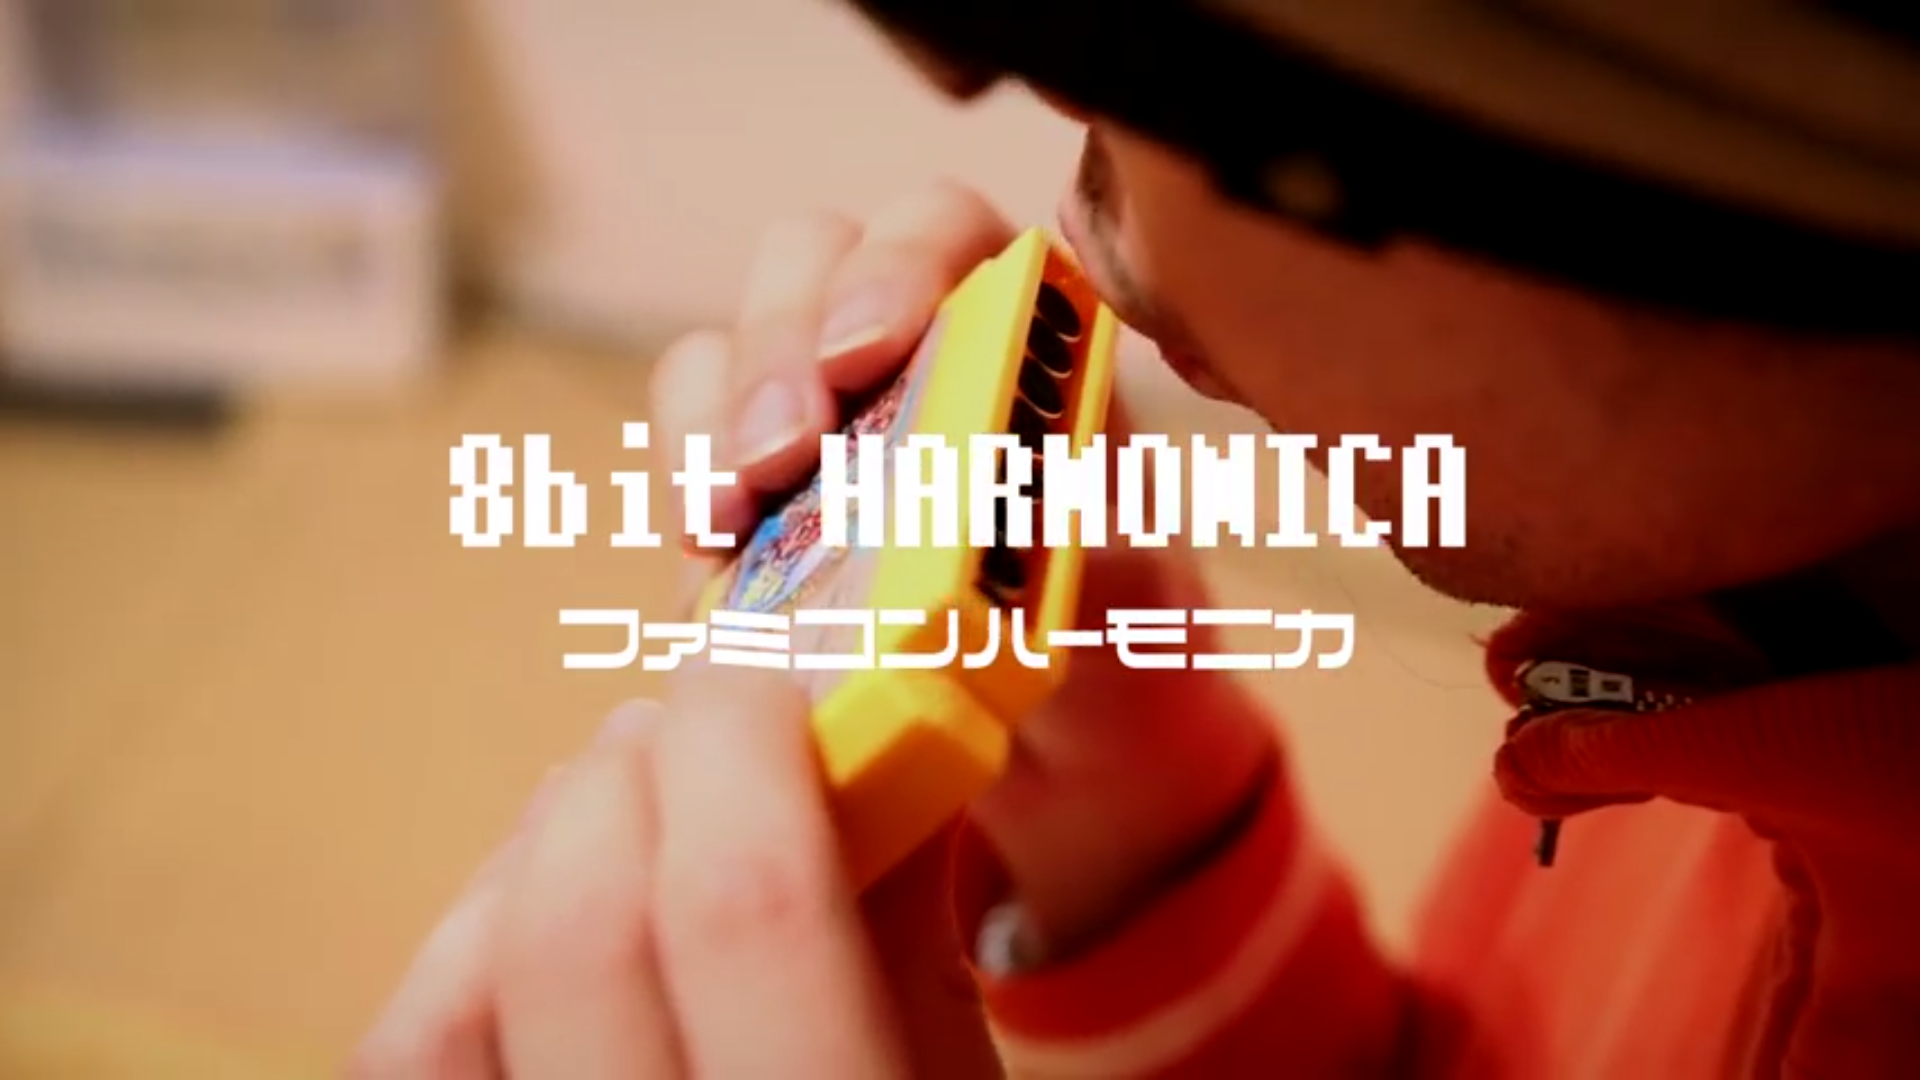 8bit Harmonica: Music Made By Blowing Into Famicom Cartridges